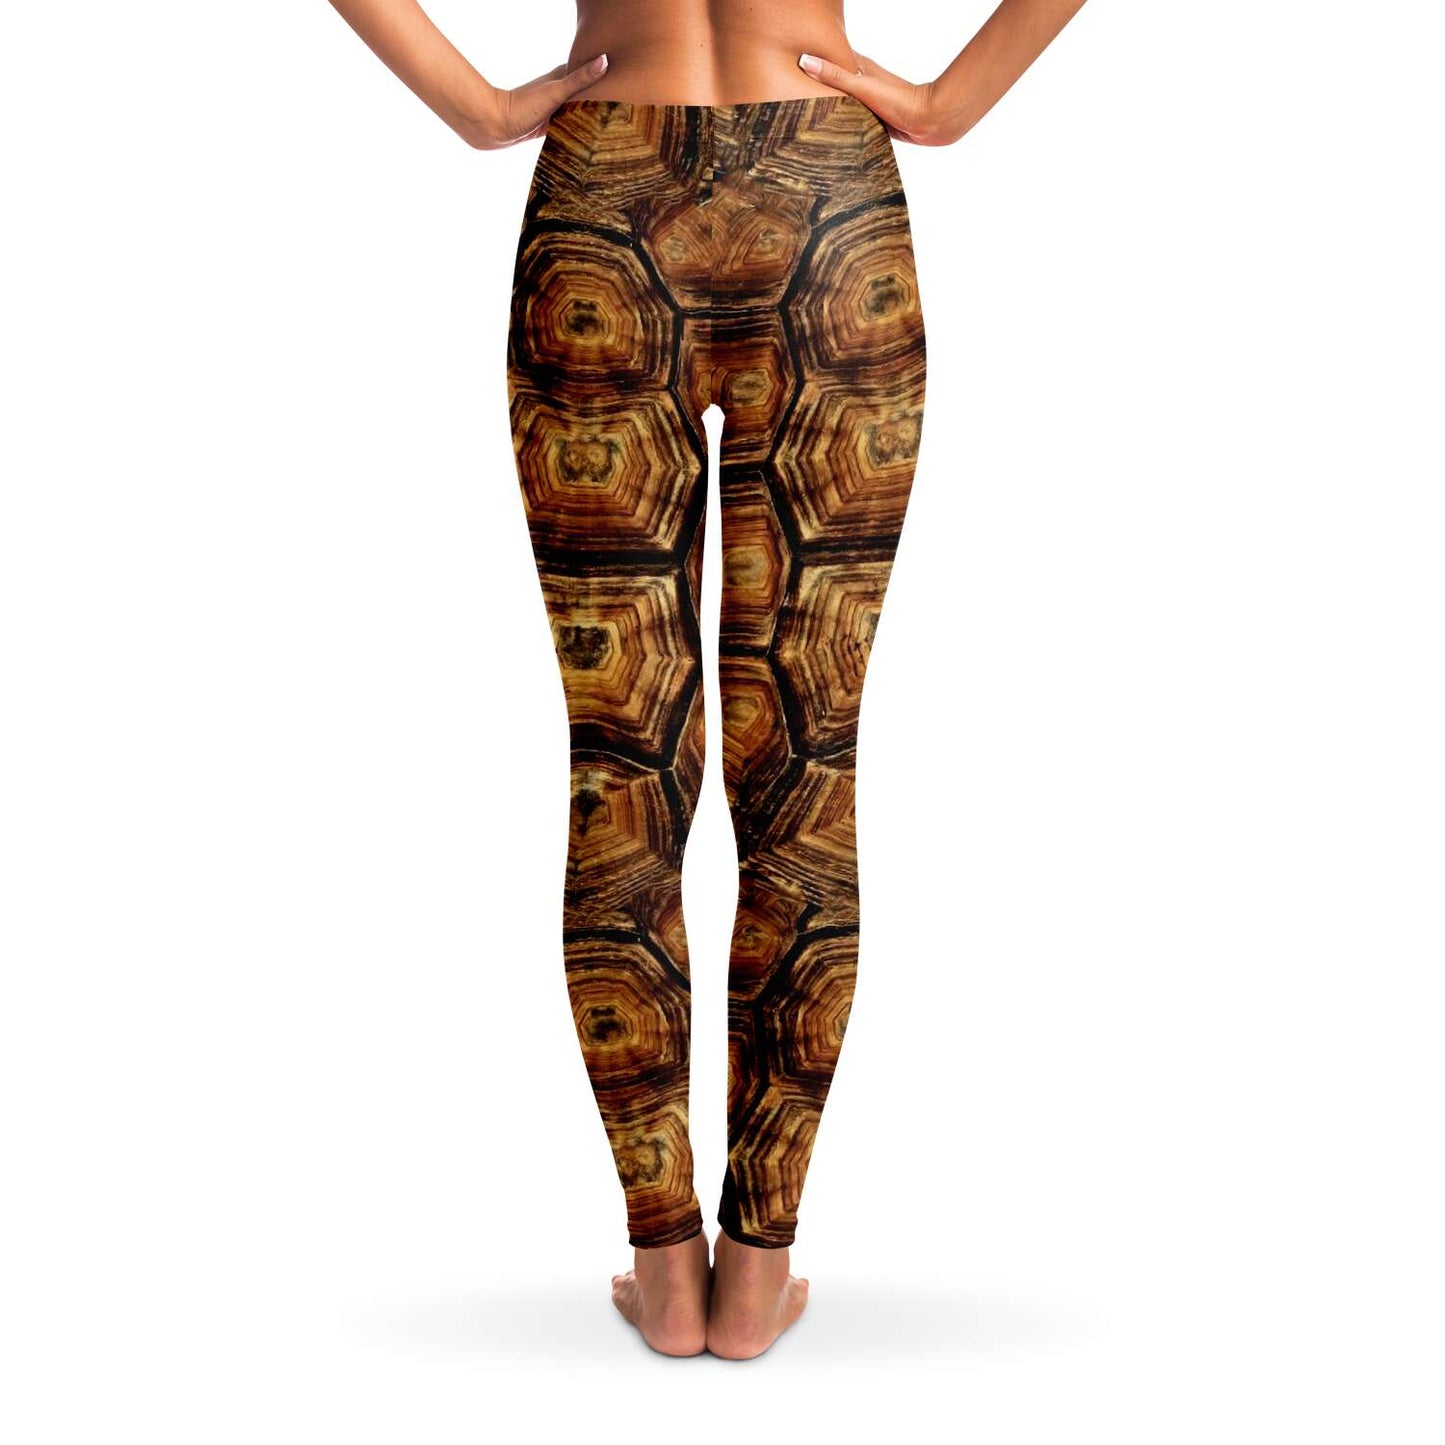 Back view of turtle leggings / skins on model - for scuba diving, yoga and other sports